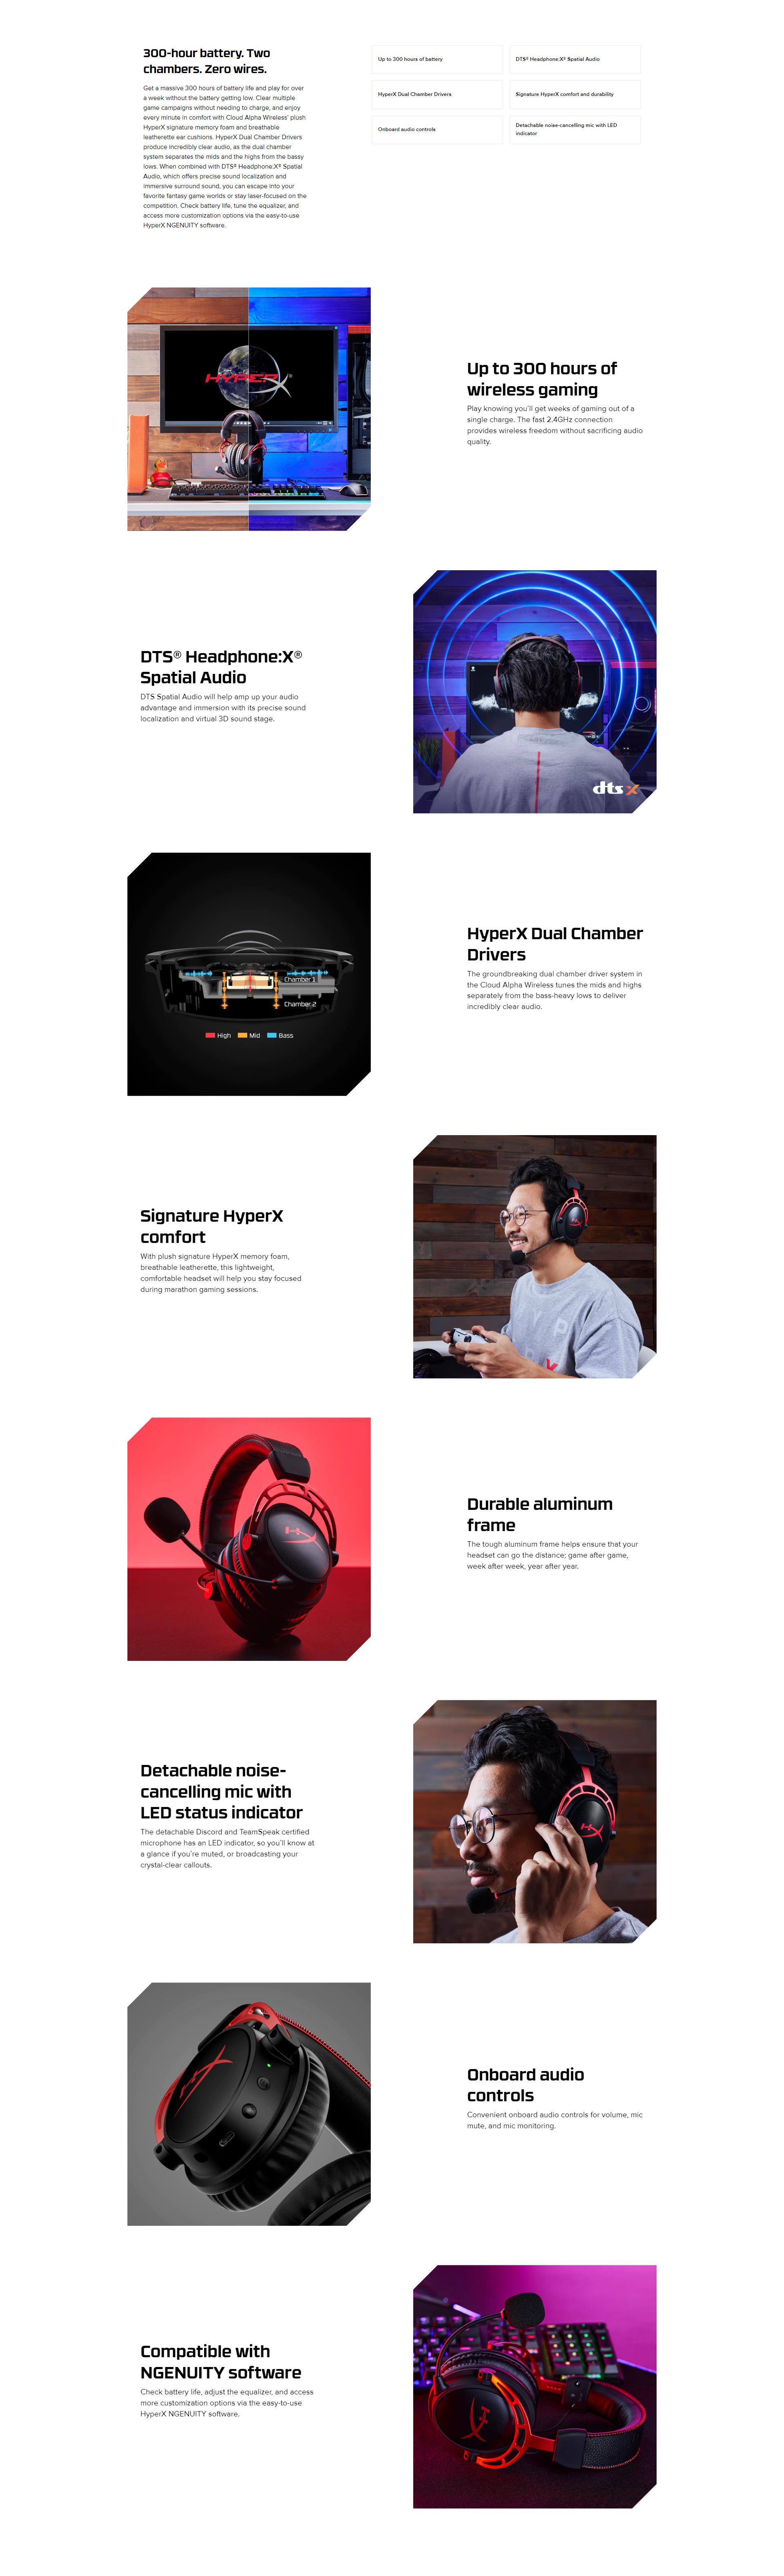 A large marketing image providing additional information about the product HyperX Cloud Alpha - Wireless Gaming Headset - Additional alt info not provided